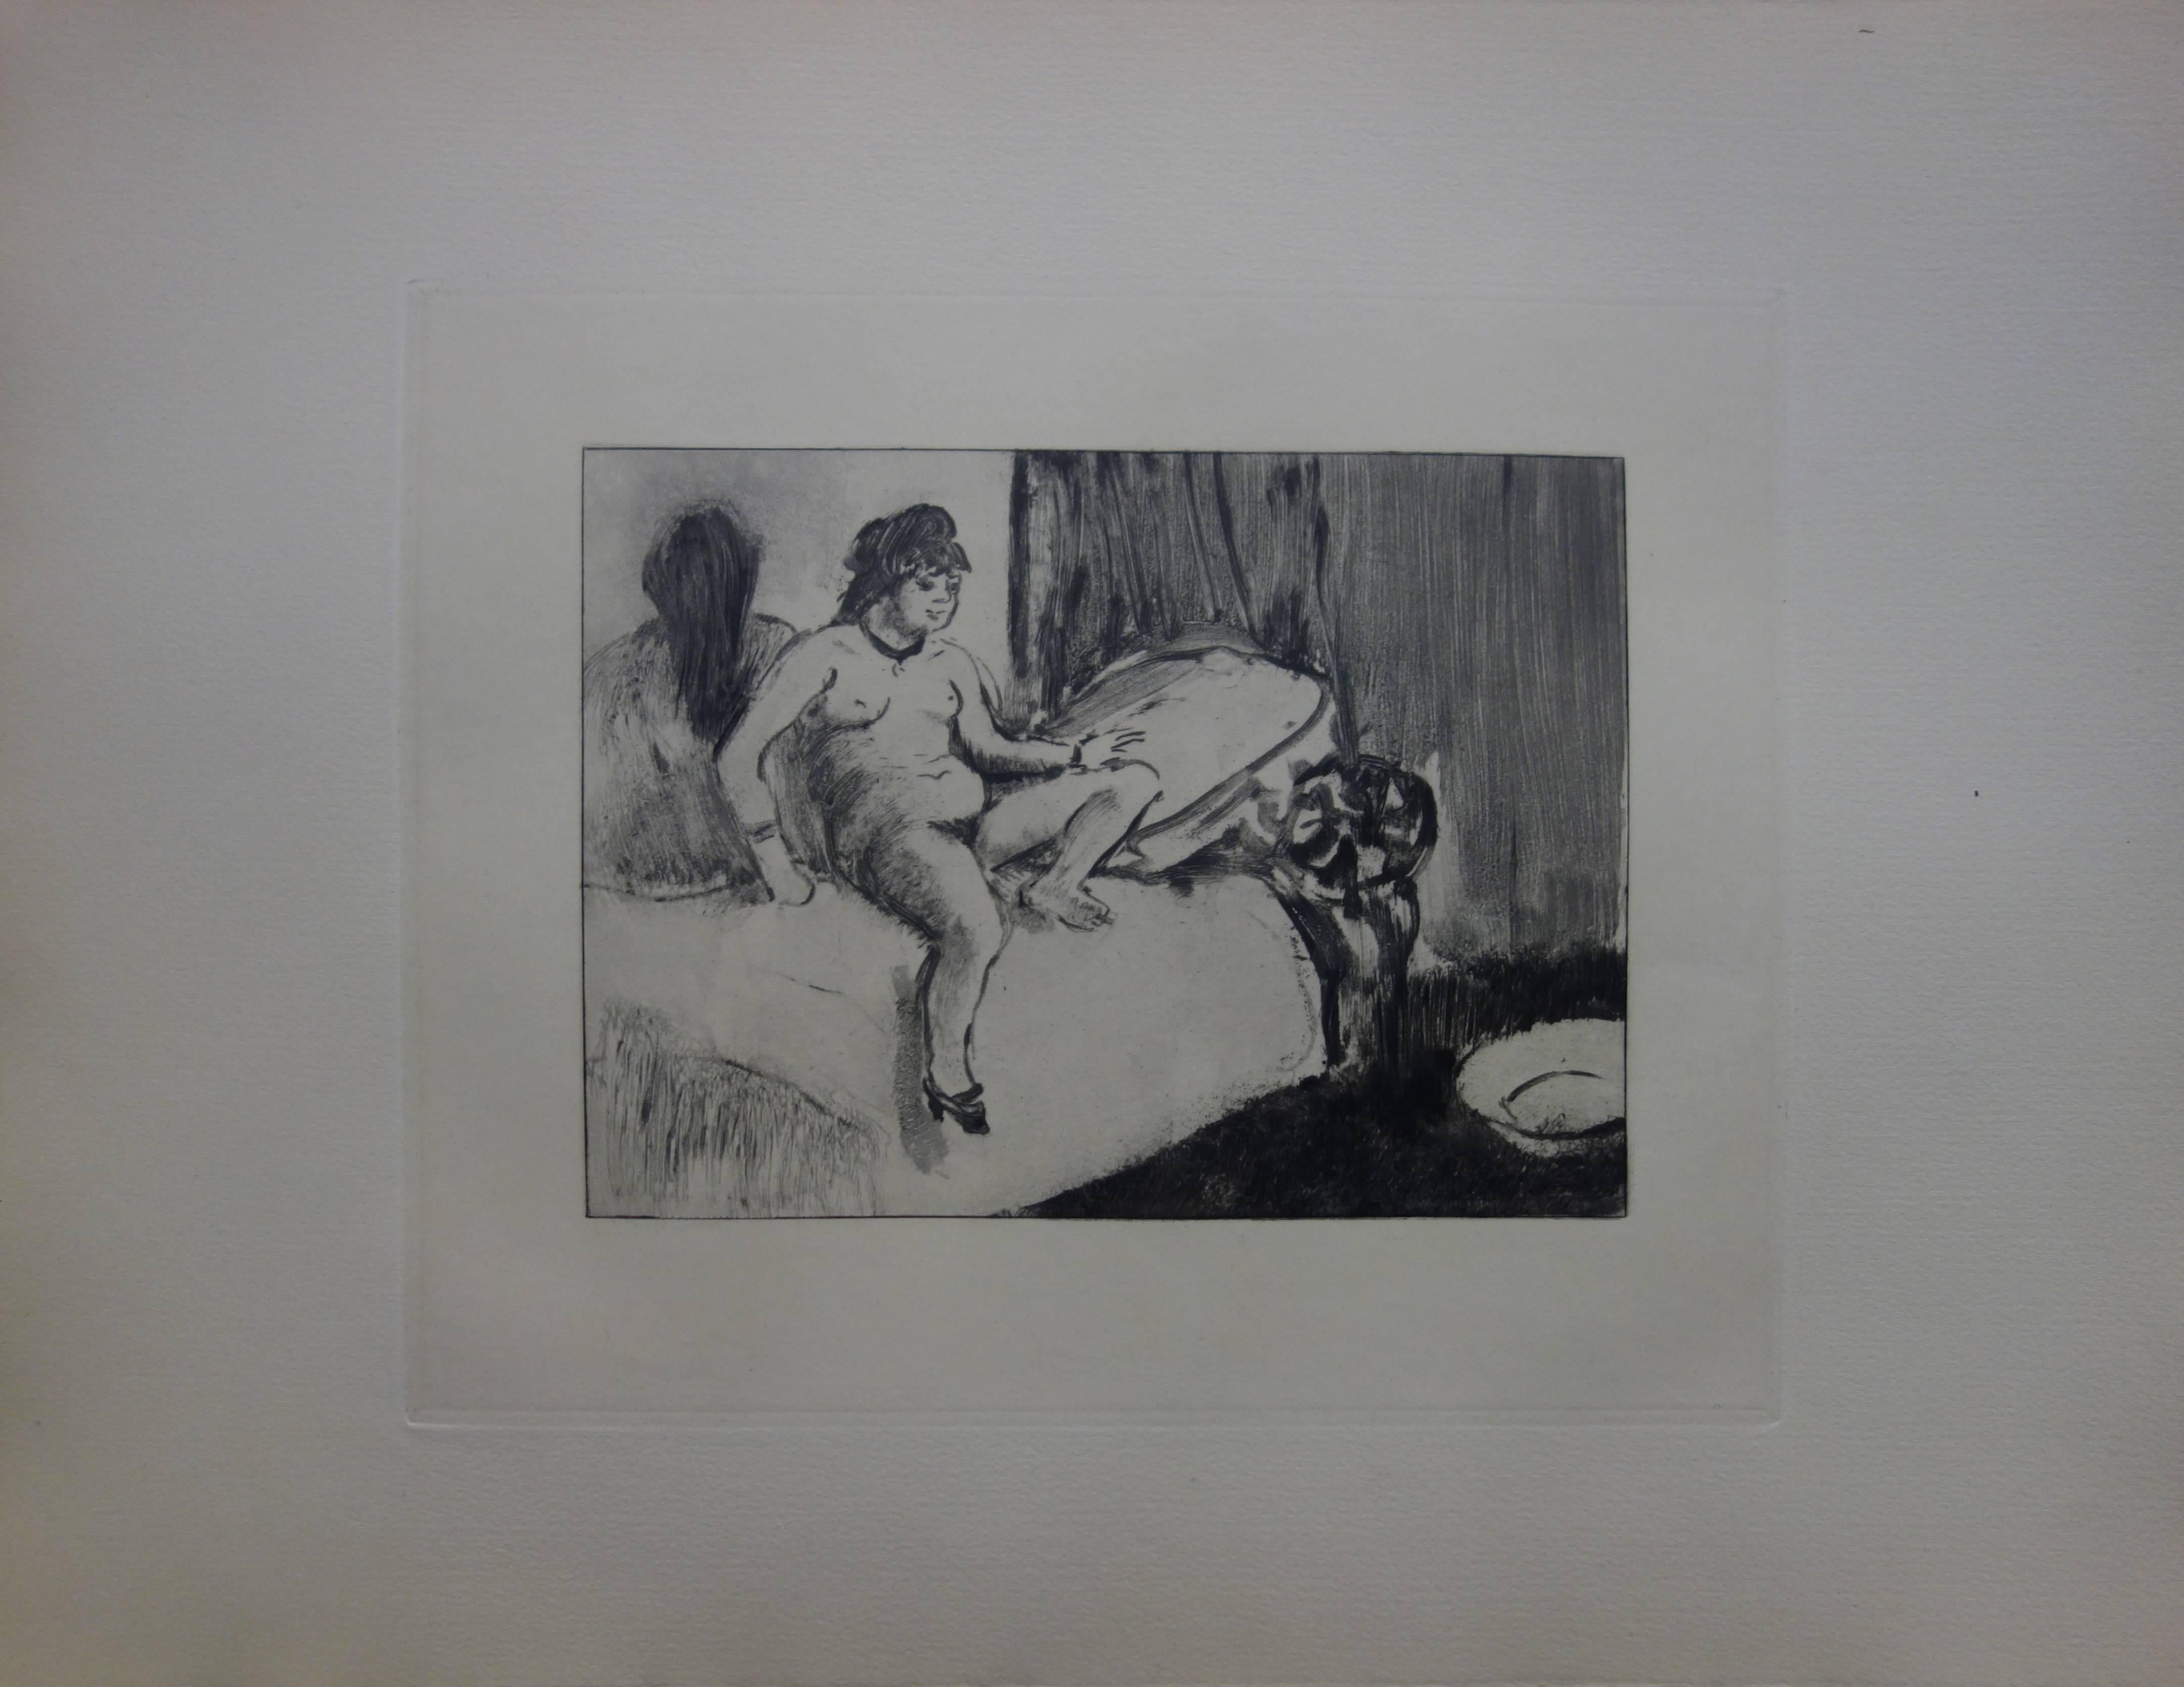 Whorehouse Scene : In the Room with a Miror - Etching - Print by (after) Edgar Degas